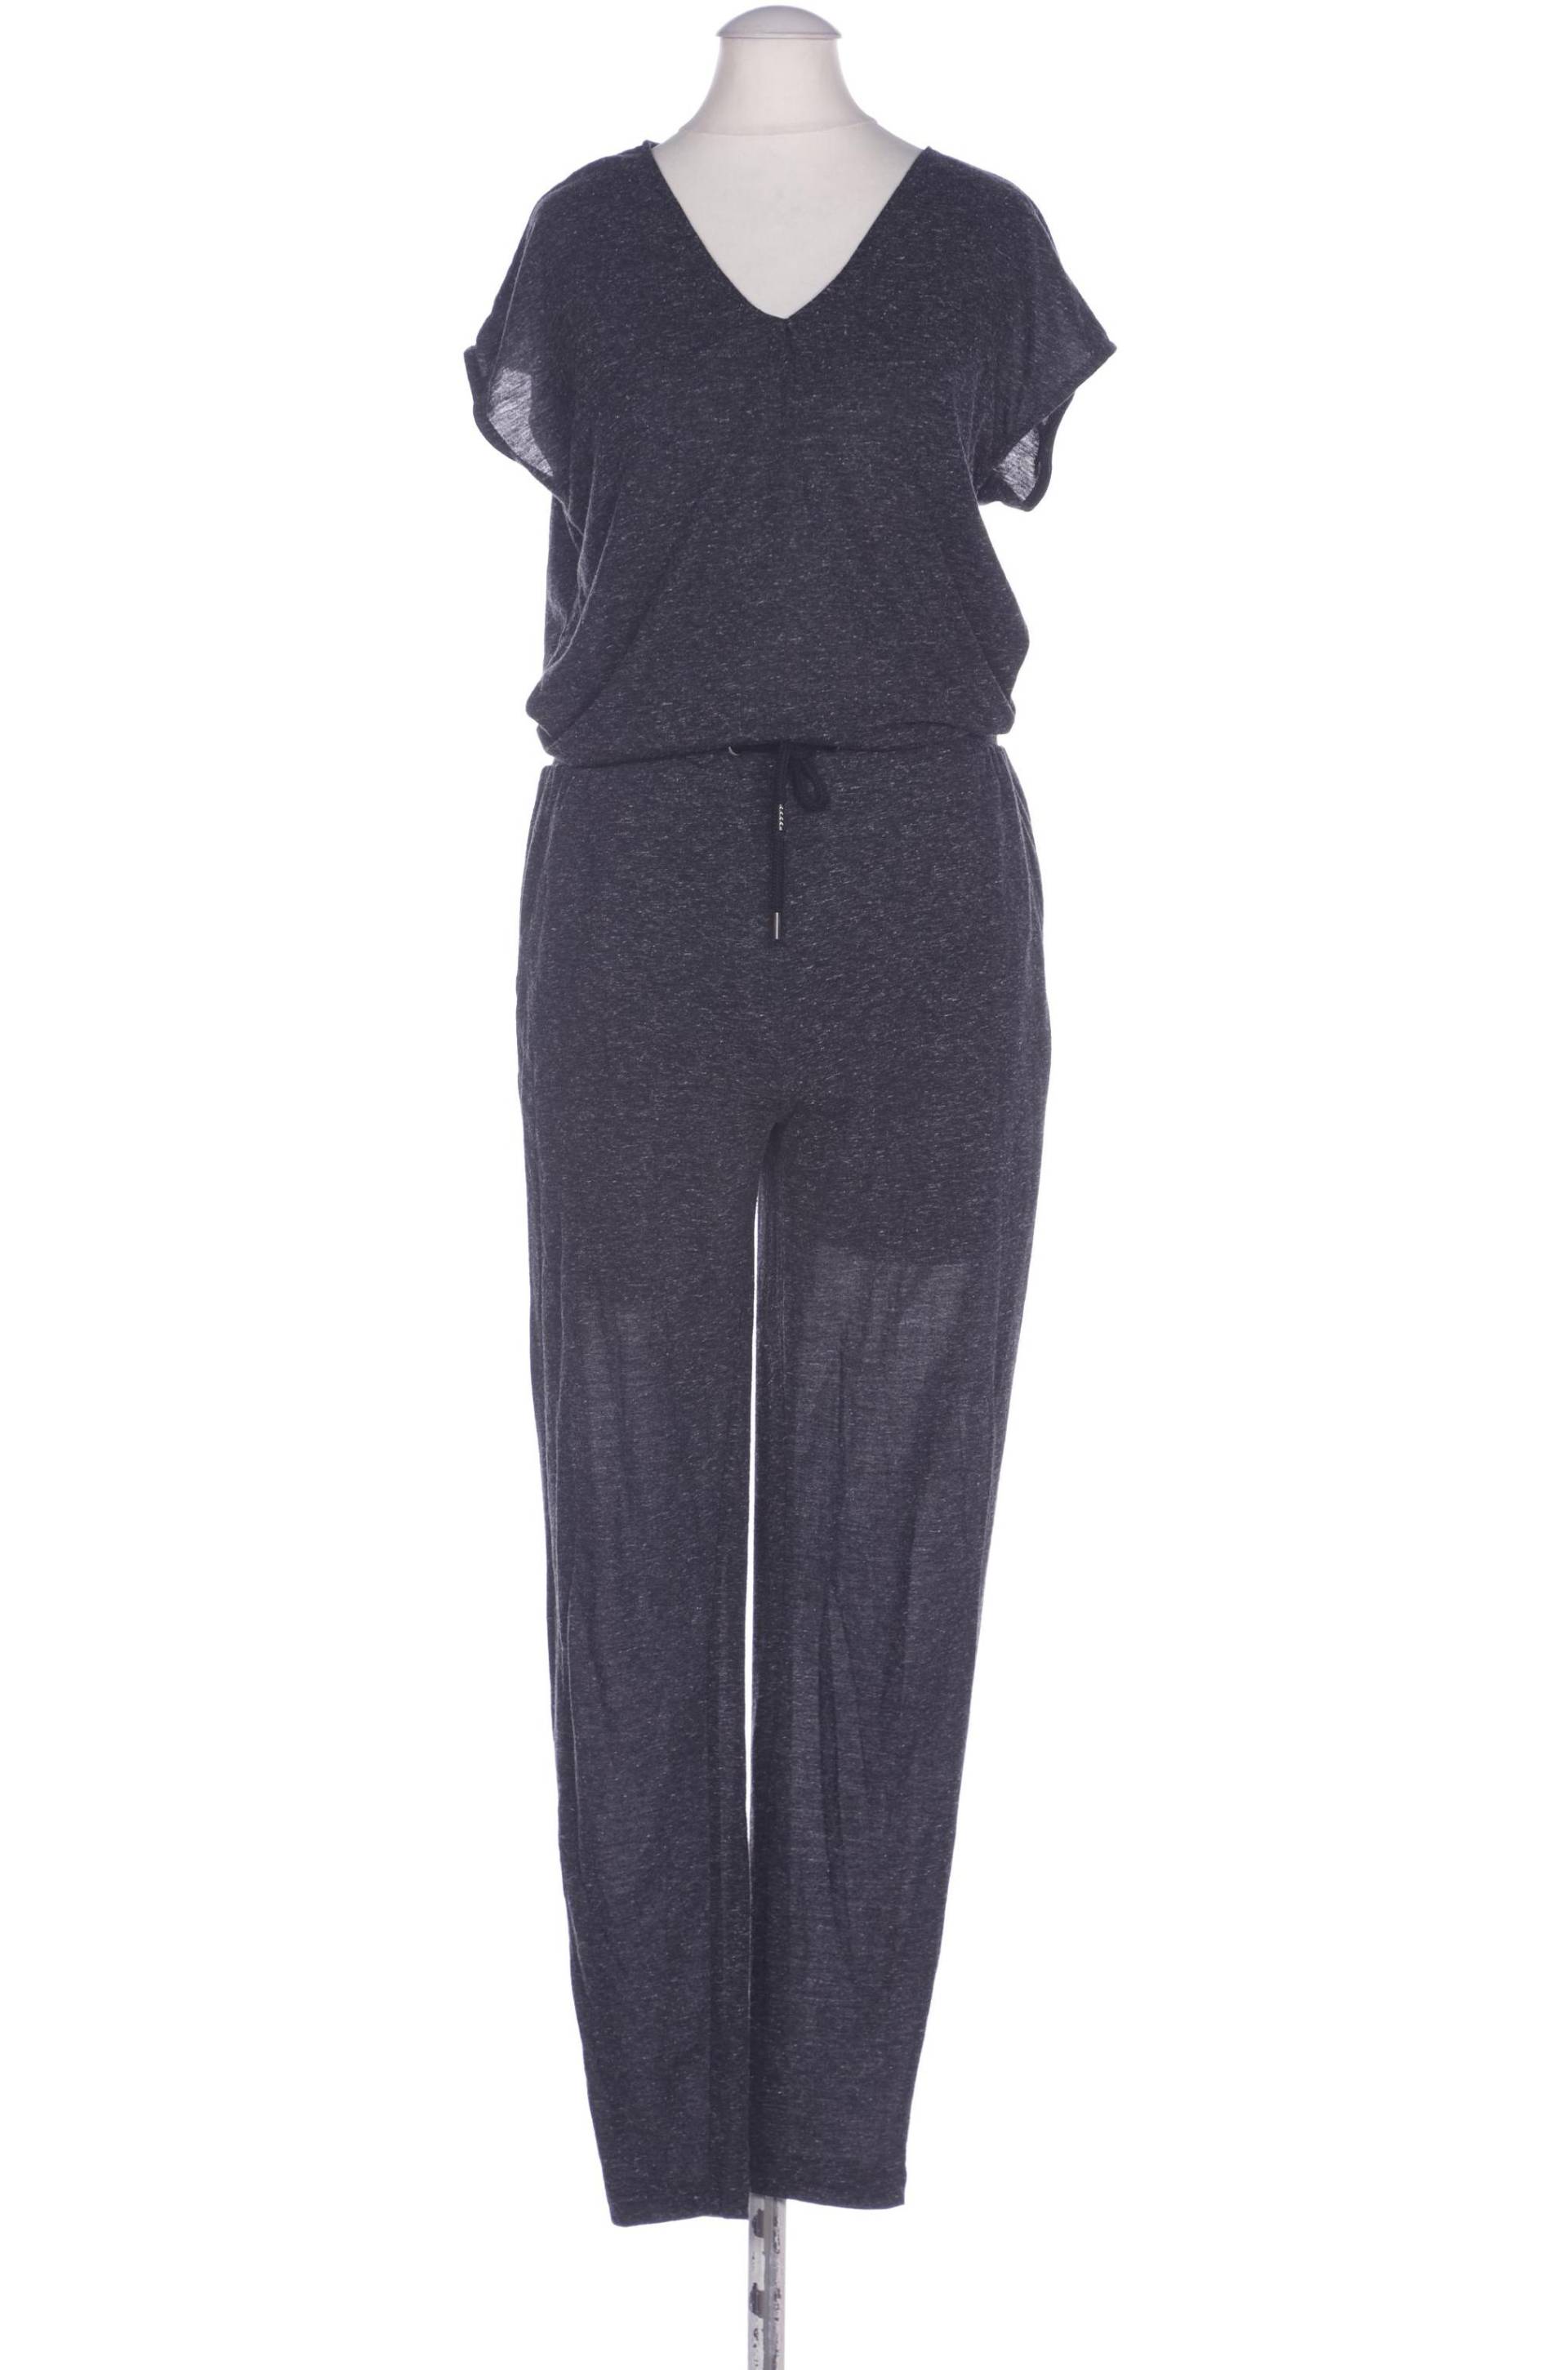 SELECTED Damen Jumpsuit/Overall, grau von Selected